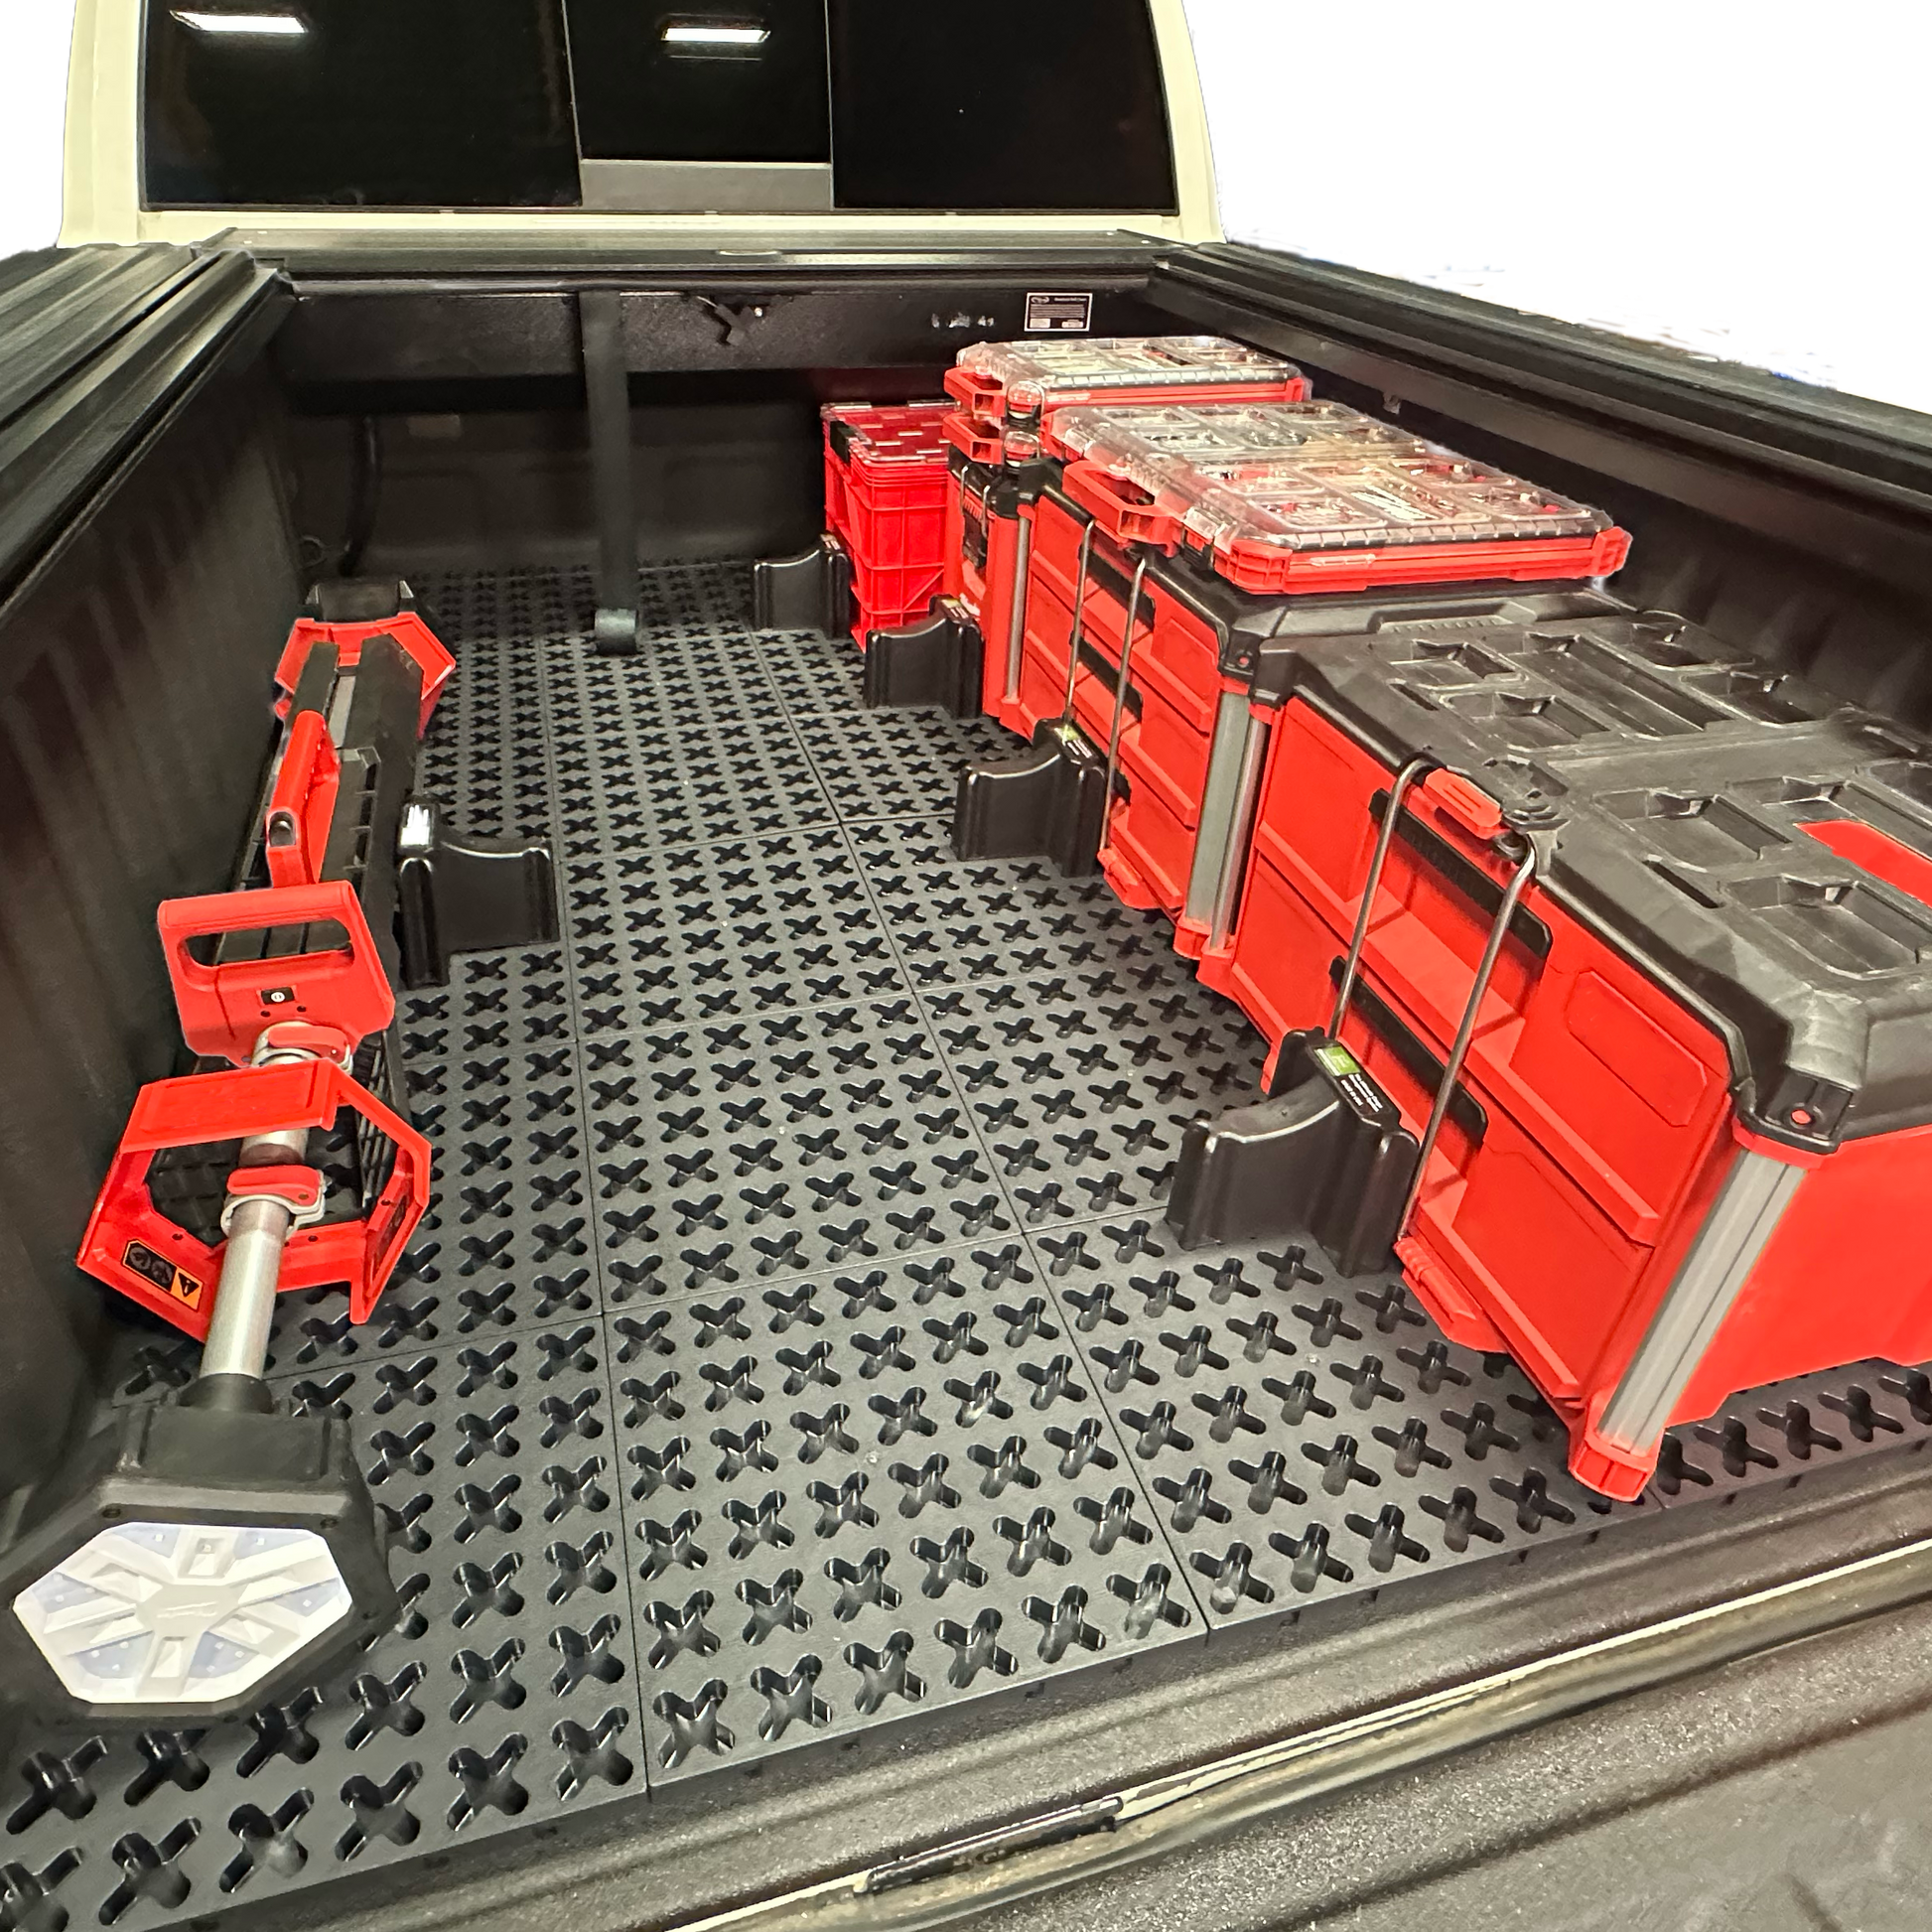 Tmat grid cargo system securing Milwaukee Packout tool boxes and a Milwaukee shop light.